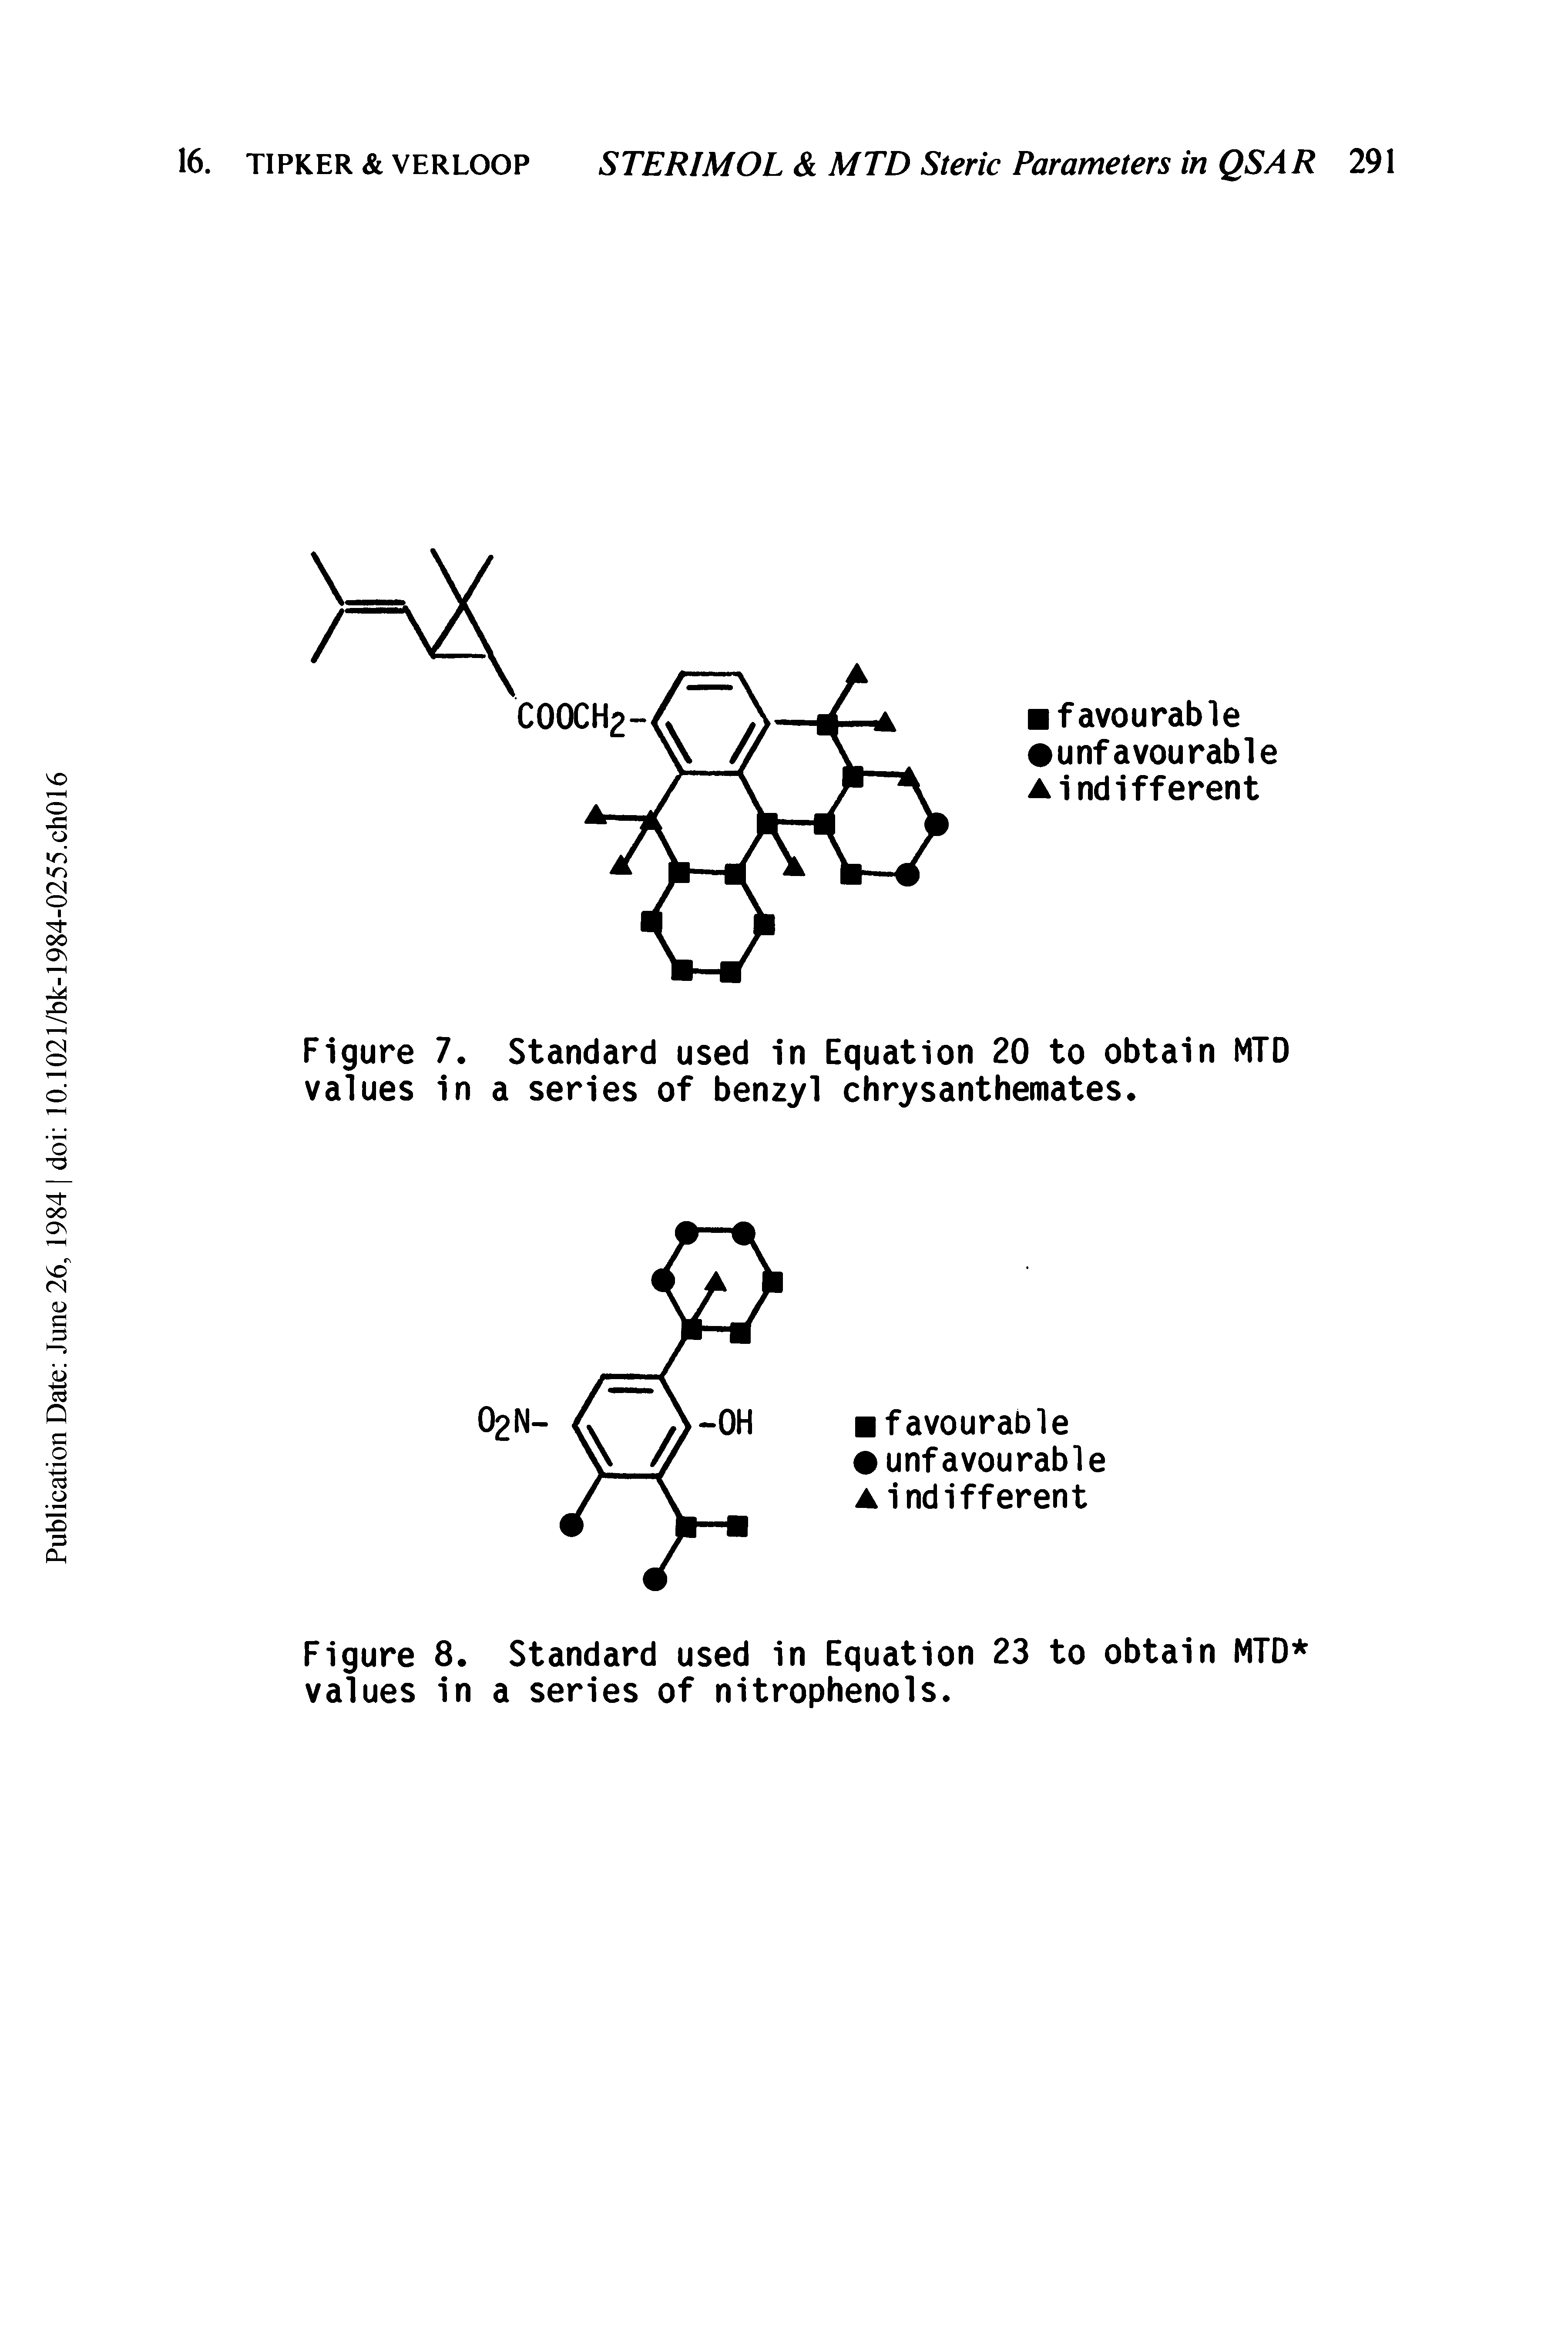 Figure 7. Standard used in Equation 20 to obtain MTD values in a series of benzyl chrysanthemates.